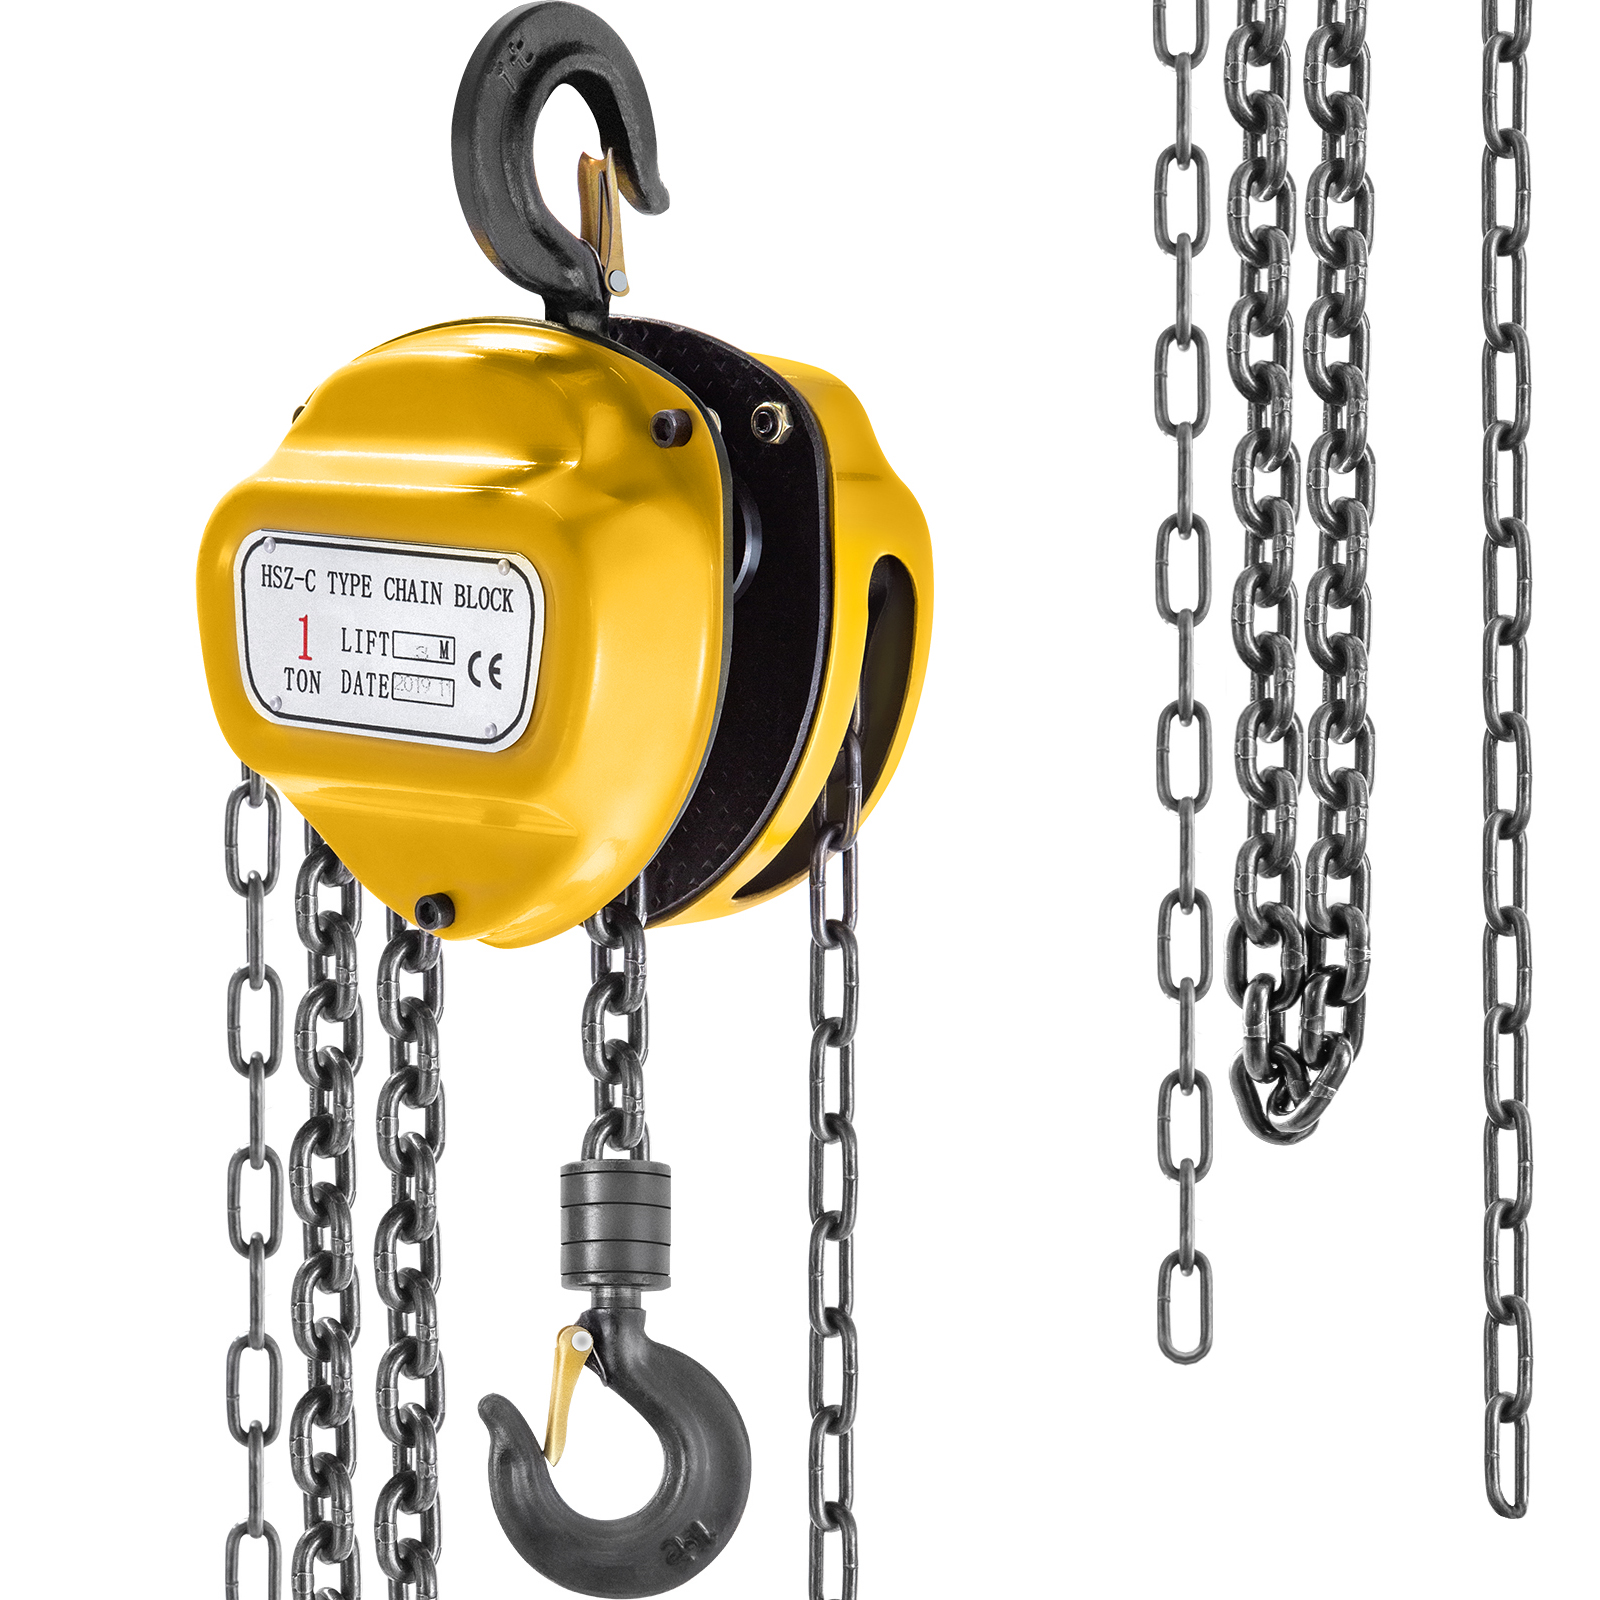 1Ton Chain Puller Block and Tackle Fall Hook Chain Lift Hoist Hand Tools 3M 